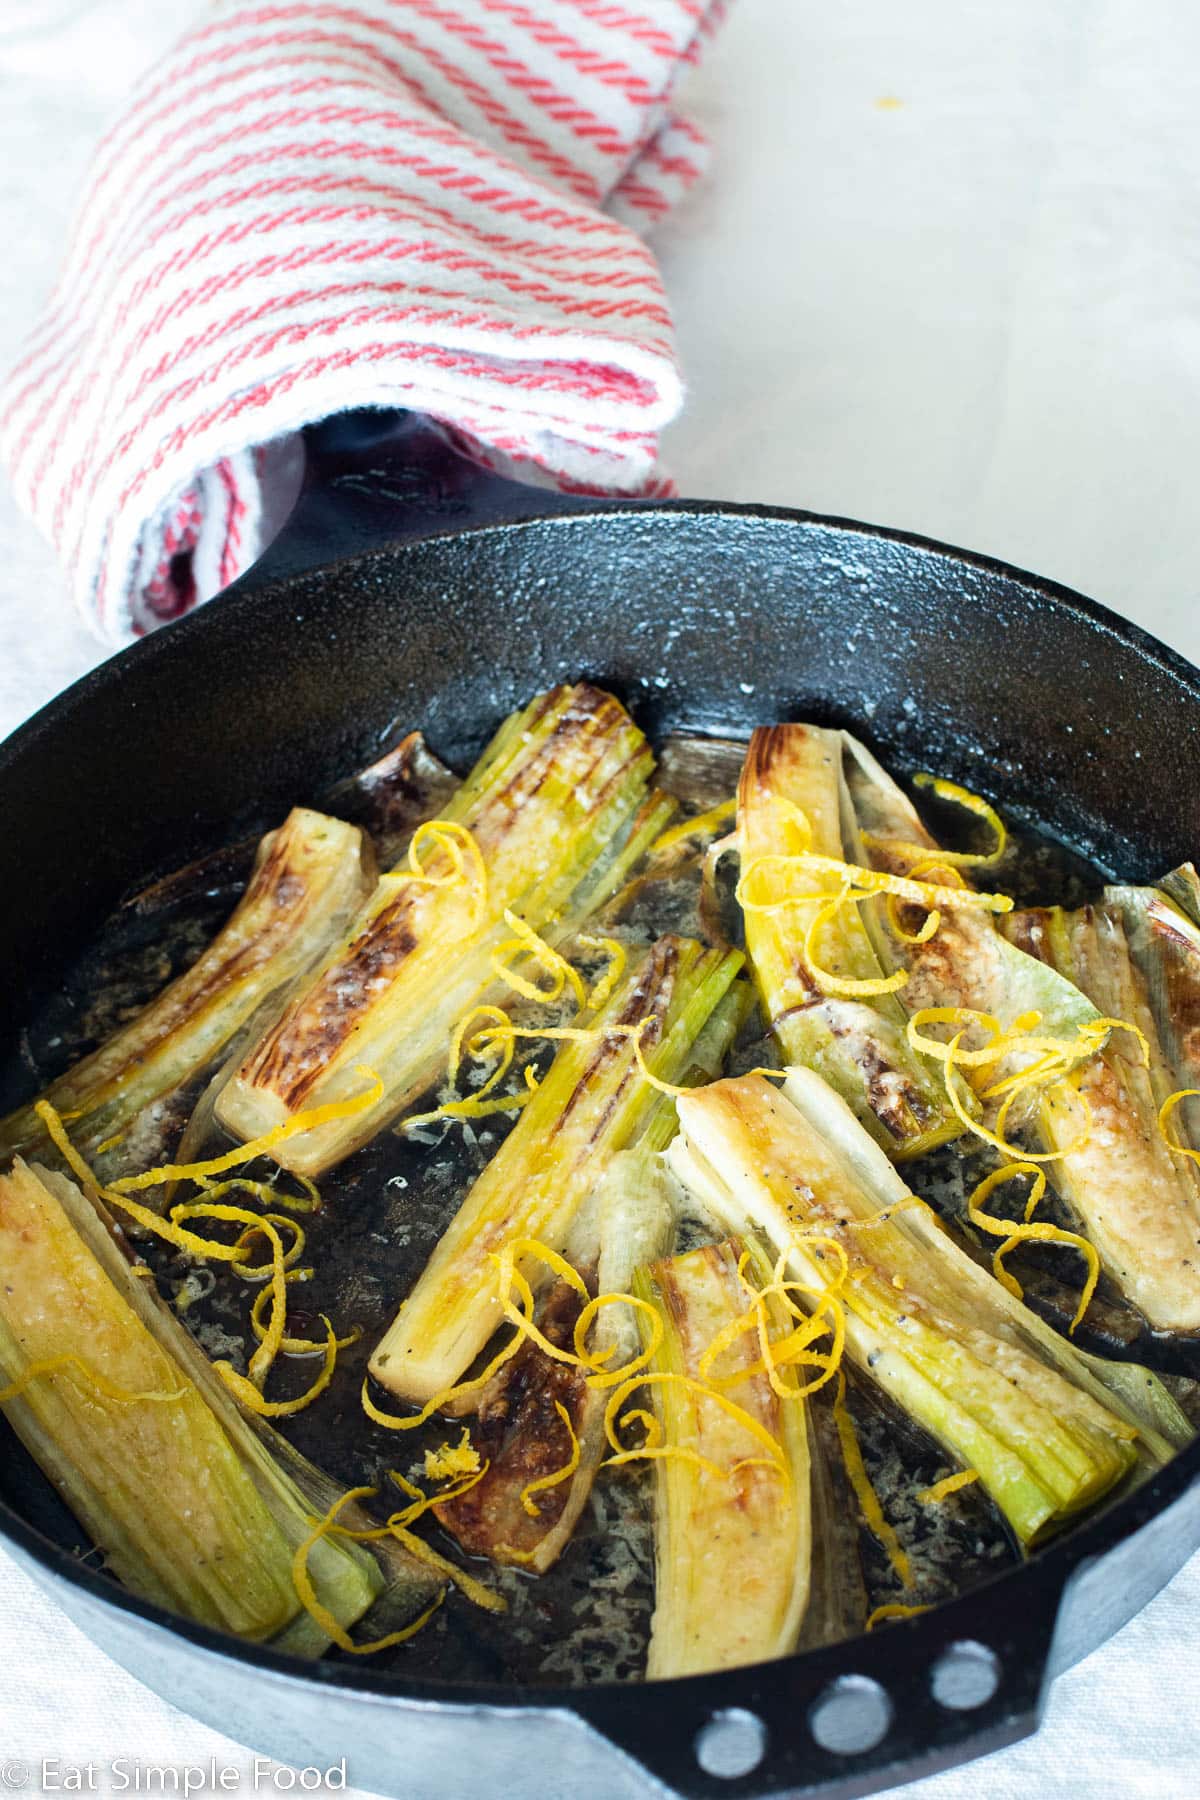 Eight seared leeks in a cast iron skillet on a white table cloth. Leeks are garnished with Parmesan cheese and lemon zest.